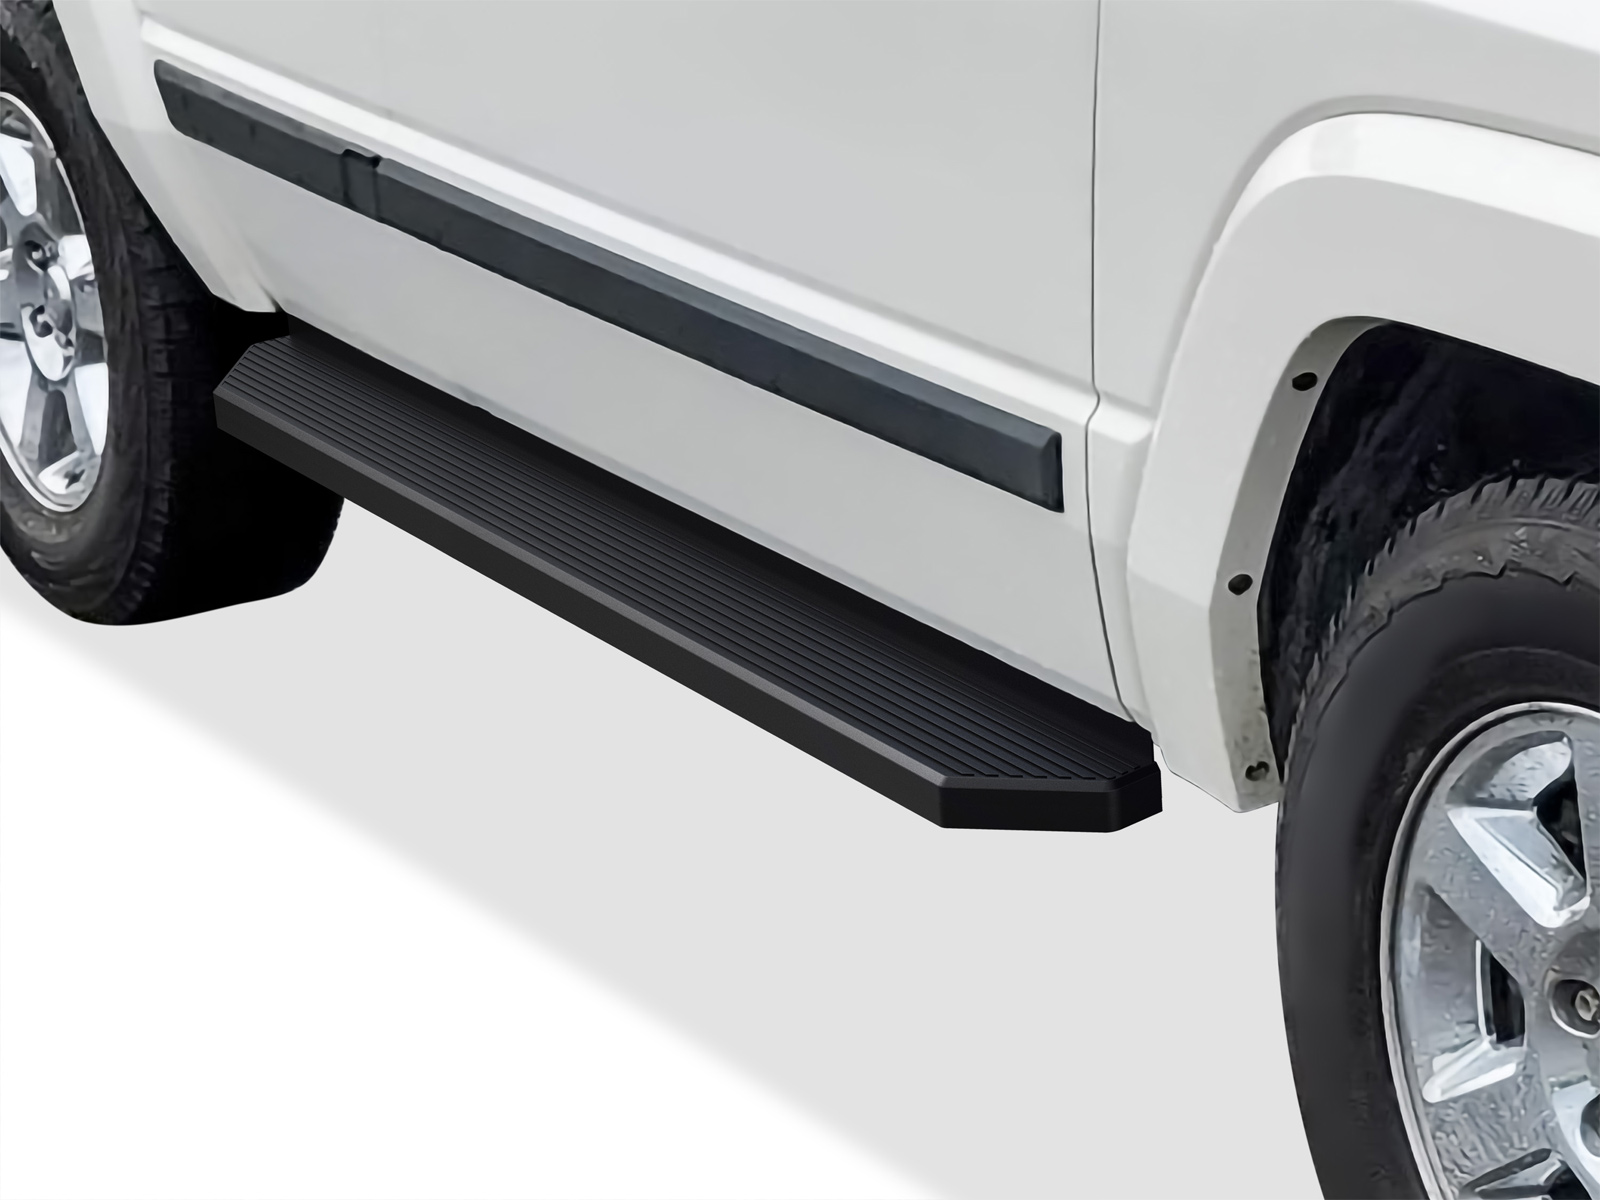 2005-2010 Jeep Grand Cherokee  2006-2010 Jeep Commander Both Sides Running Board-H Series